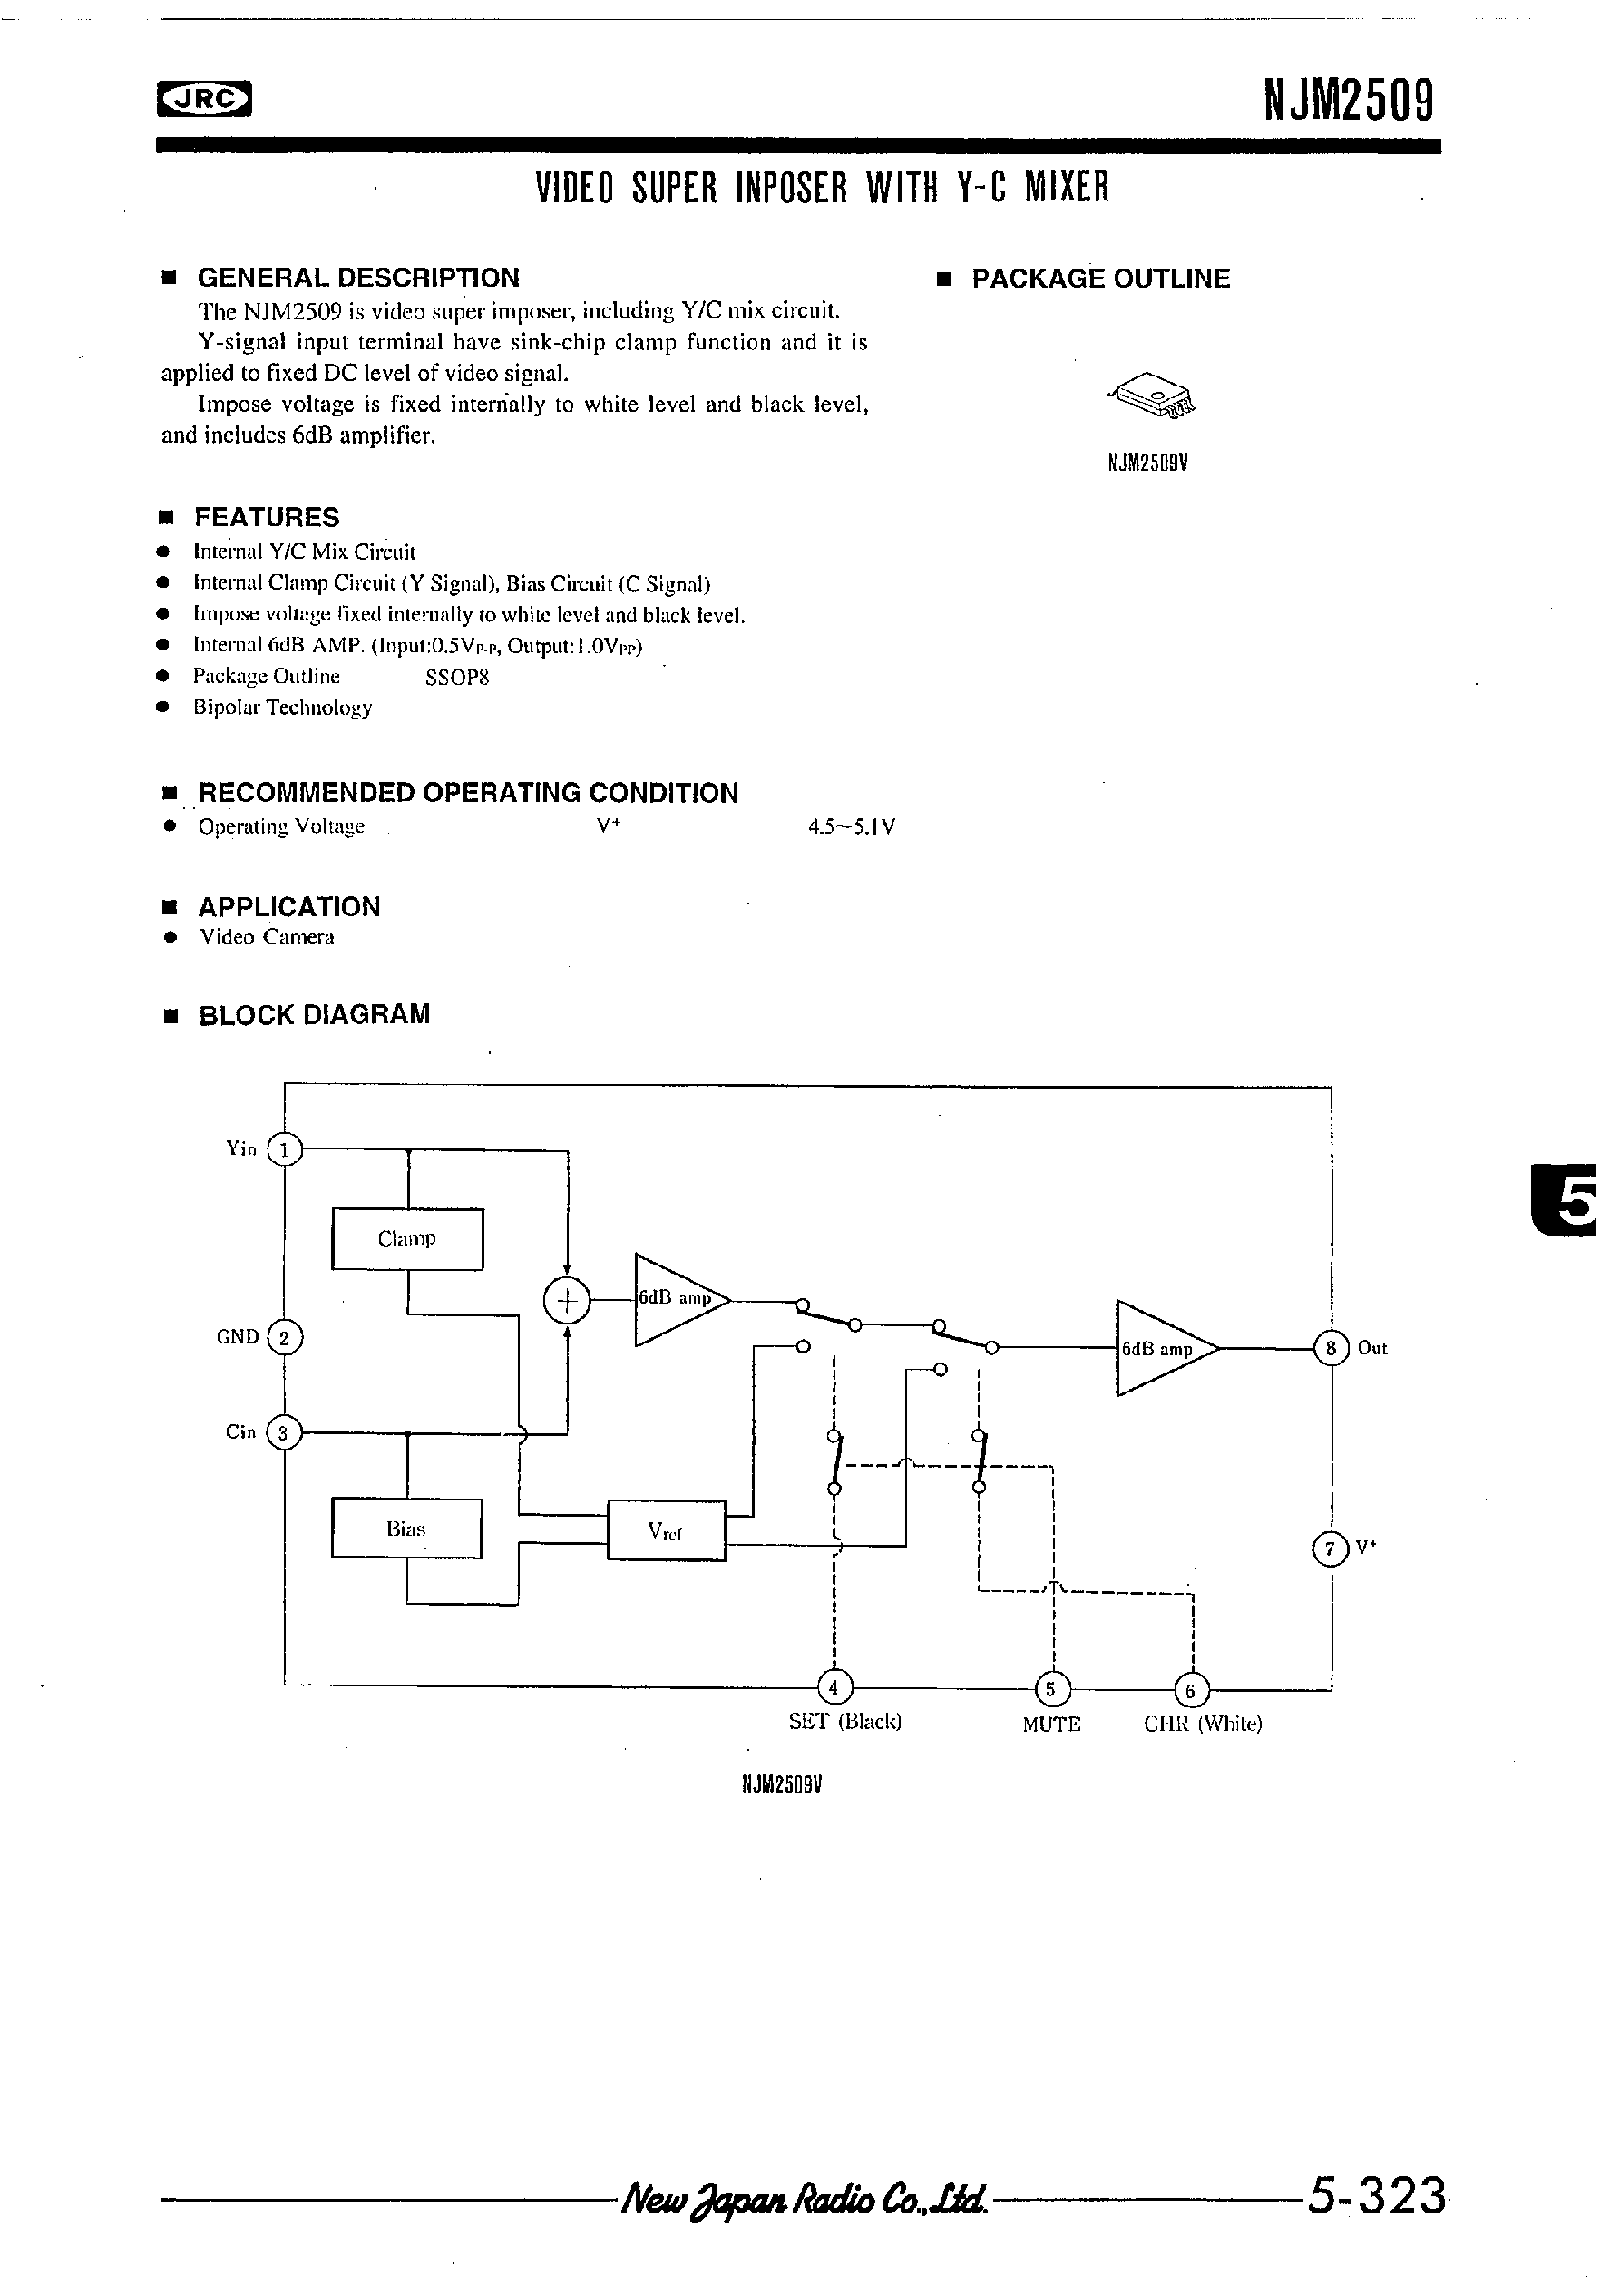 Datasheet NJM2509 - VIDEO SUPER INPOSER WITH Y-C MIXER page 1